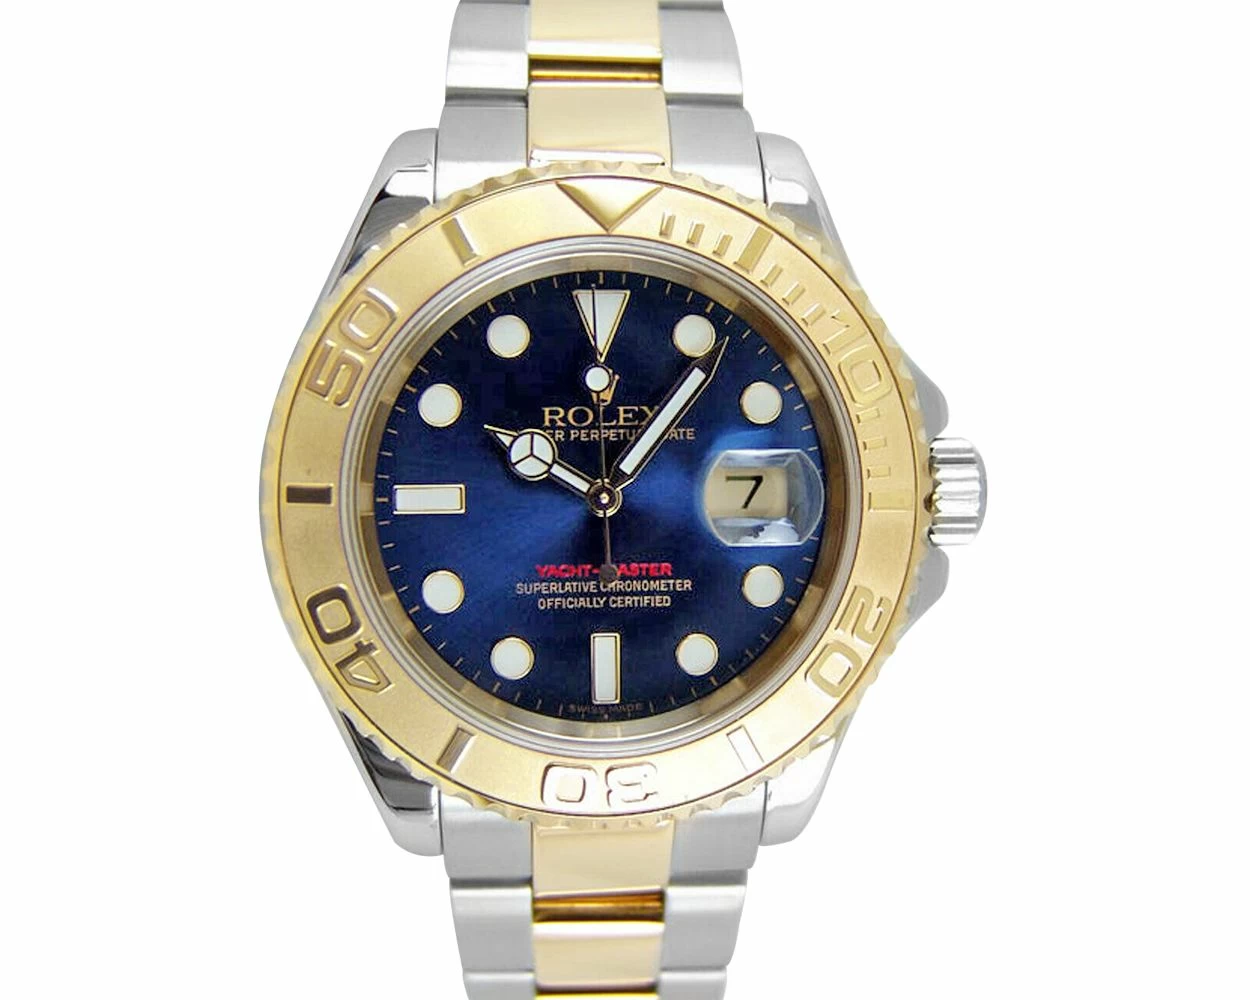 Rolex Yacht-Master 16623 40mm Blue Dial *Like New*